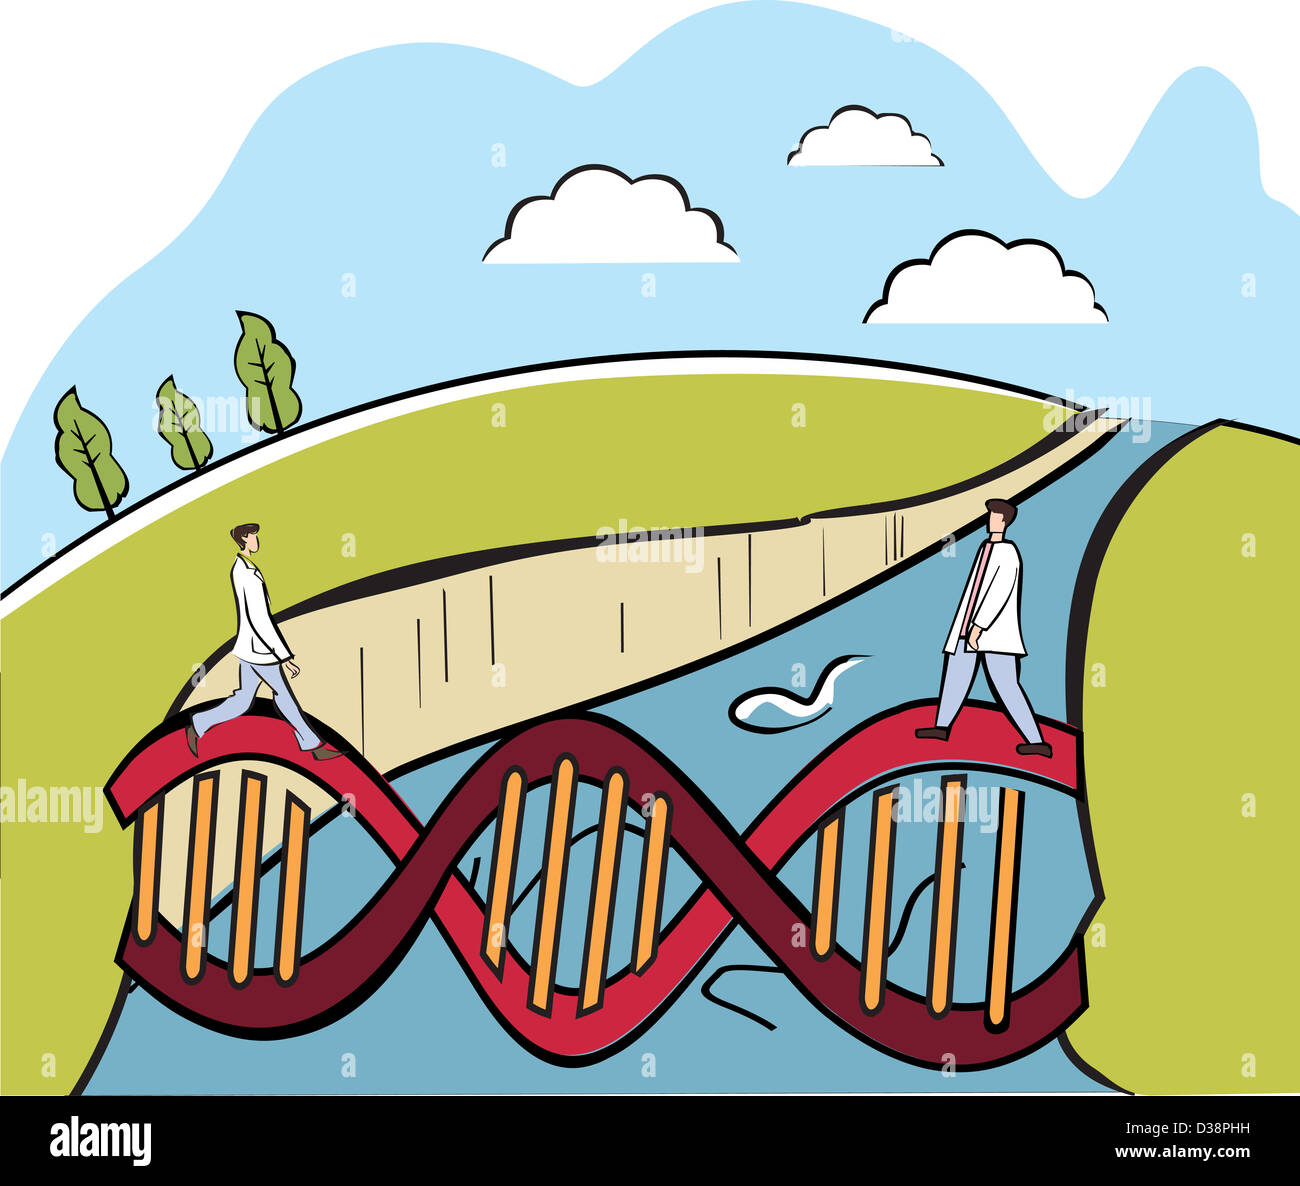 Two scientists crossing a DNA bridge Stock Photo